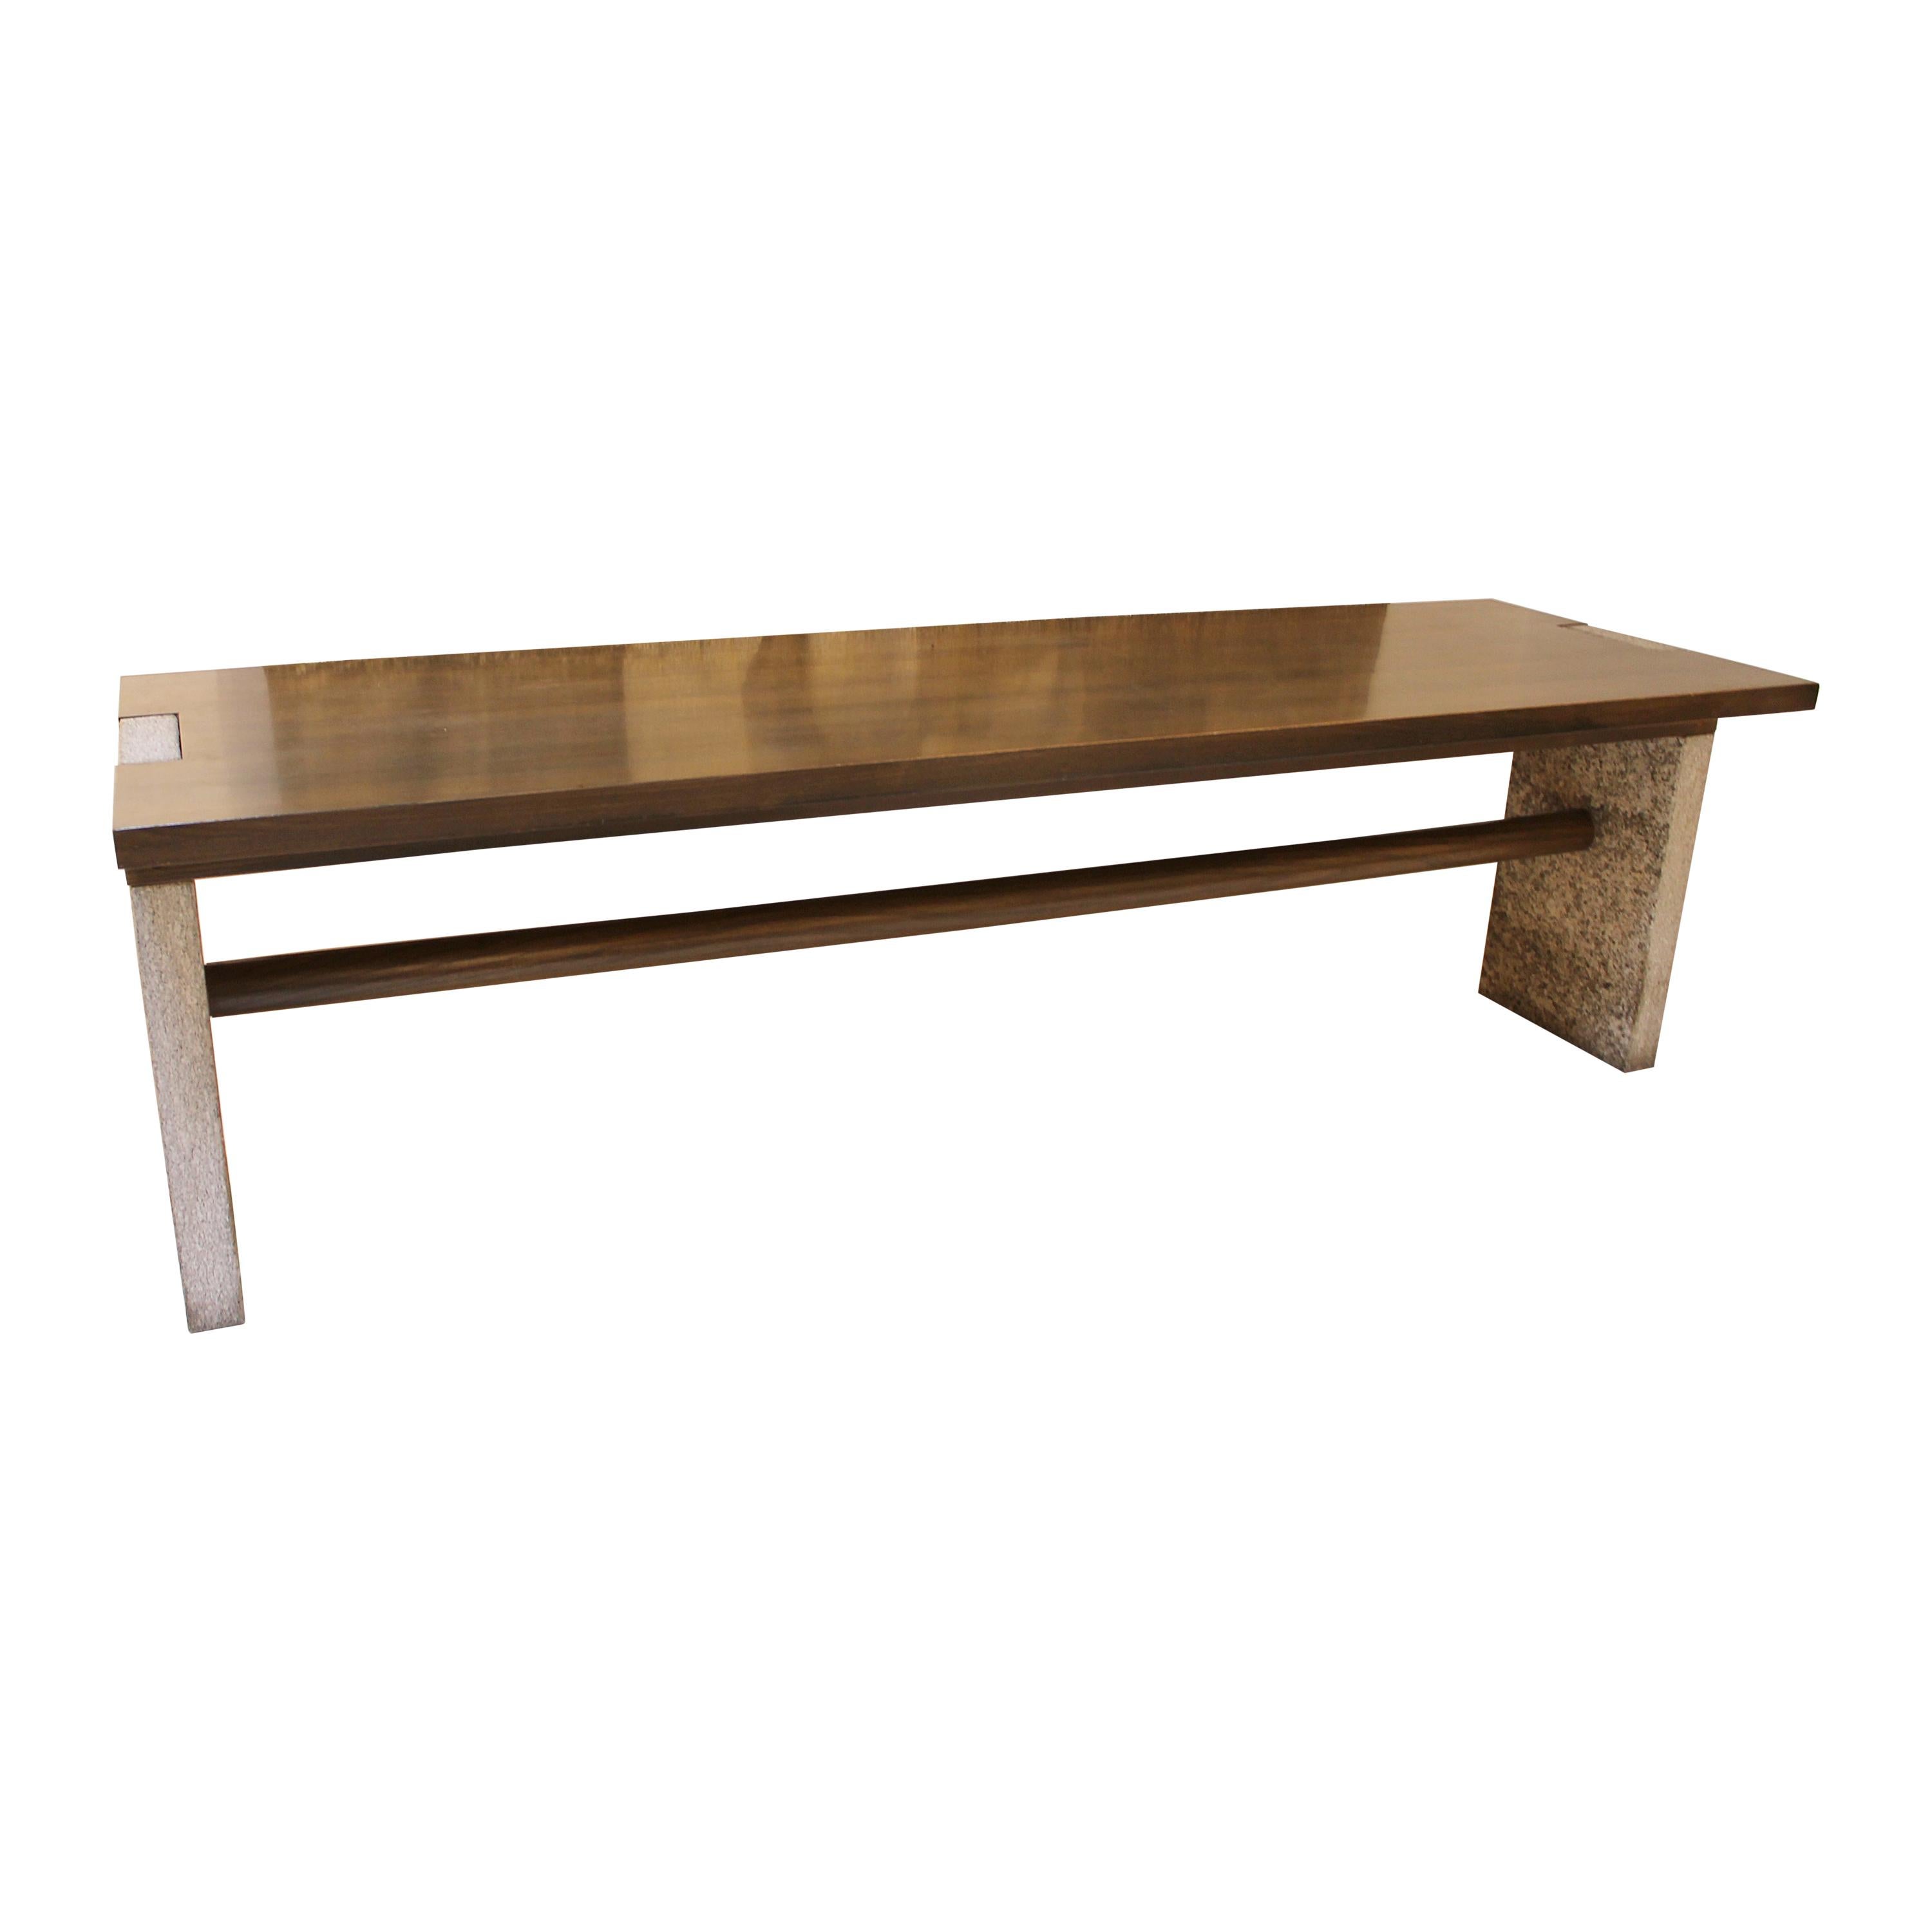 Stone and Wood Console Model 'Valmarana' by Carlo Scarpa for Simon, Italy, 1972 For Sale